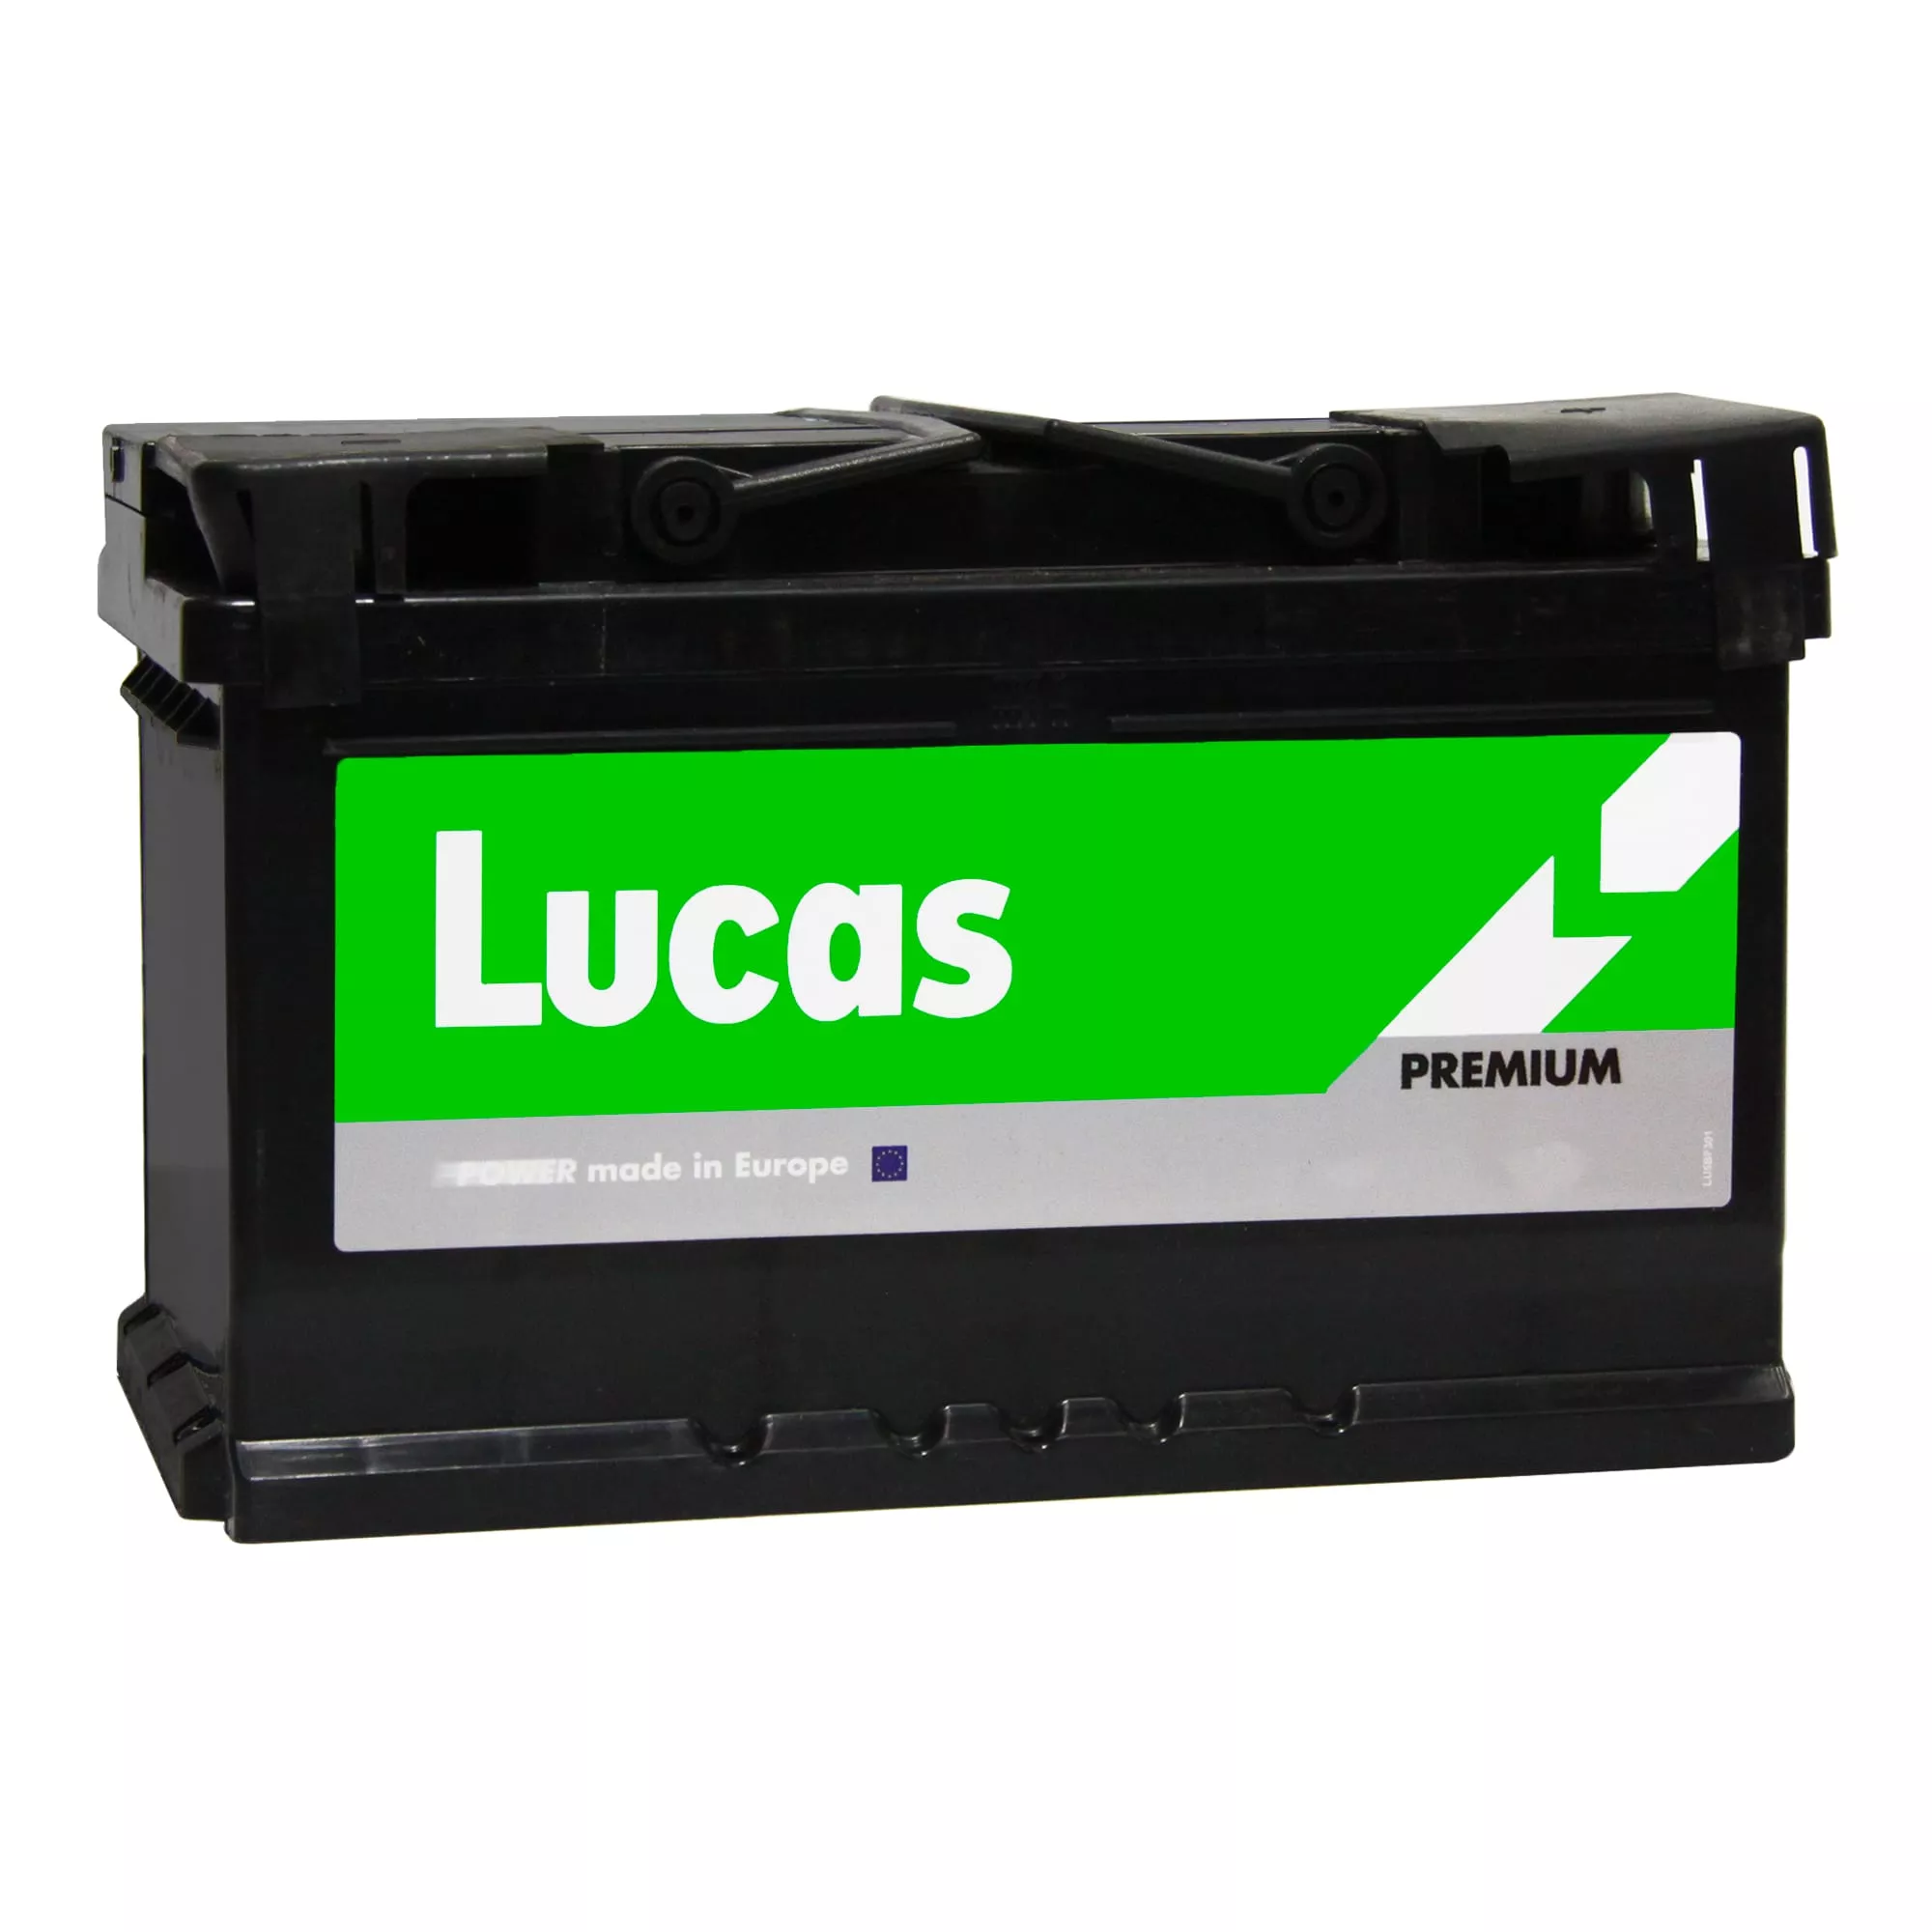 Акумулятор Lucas (Batteries manufactured by Exide in Spain) 6CT-72 АзE (LBPA722)